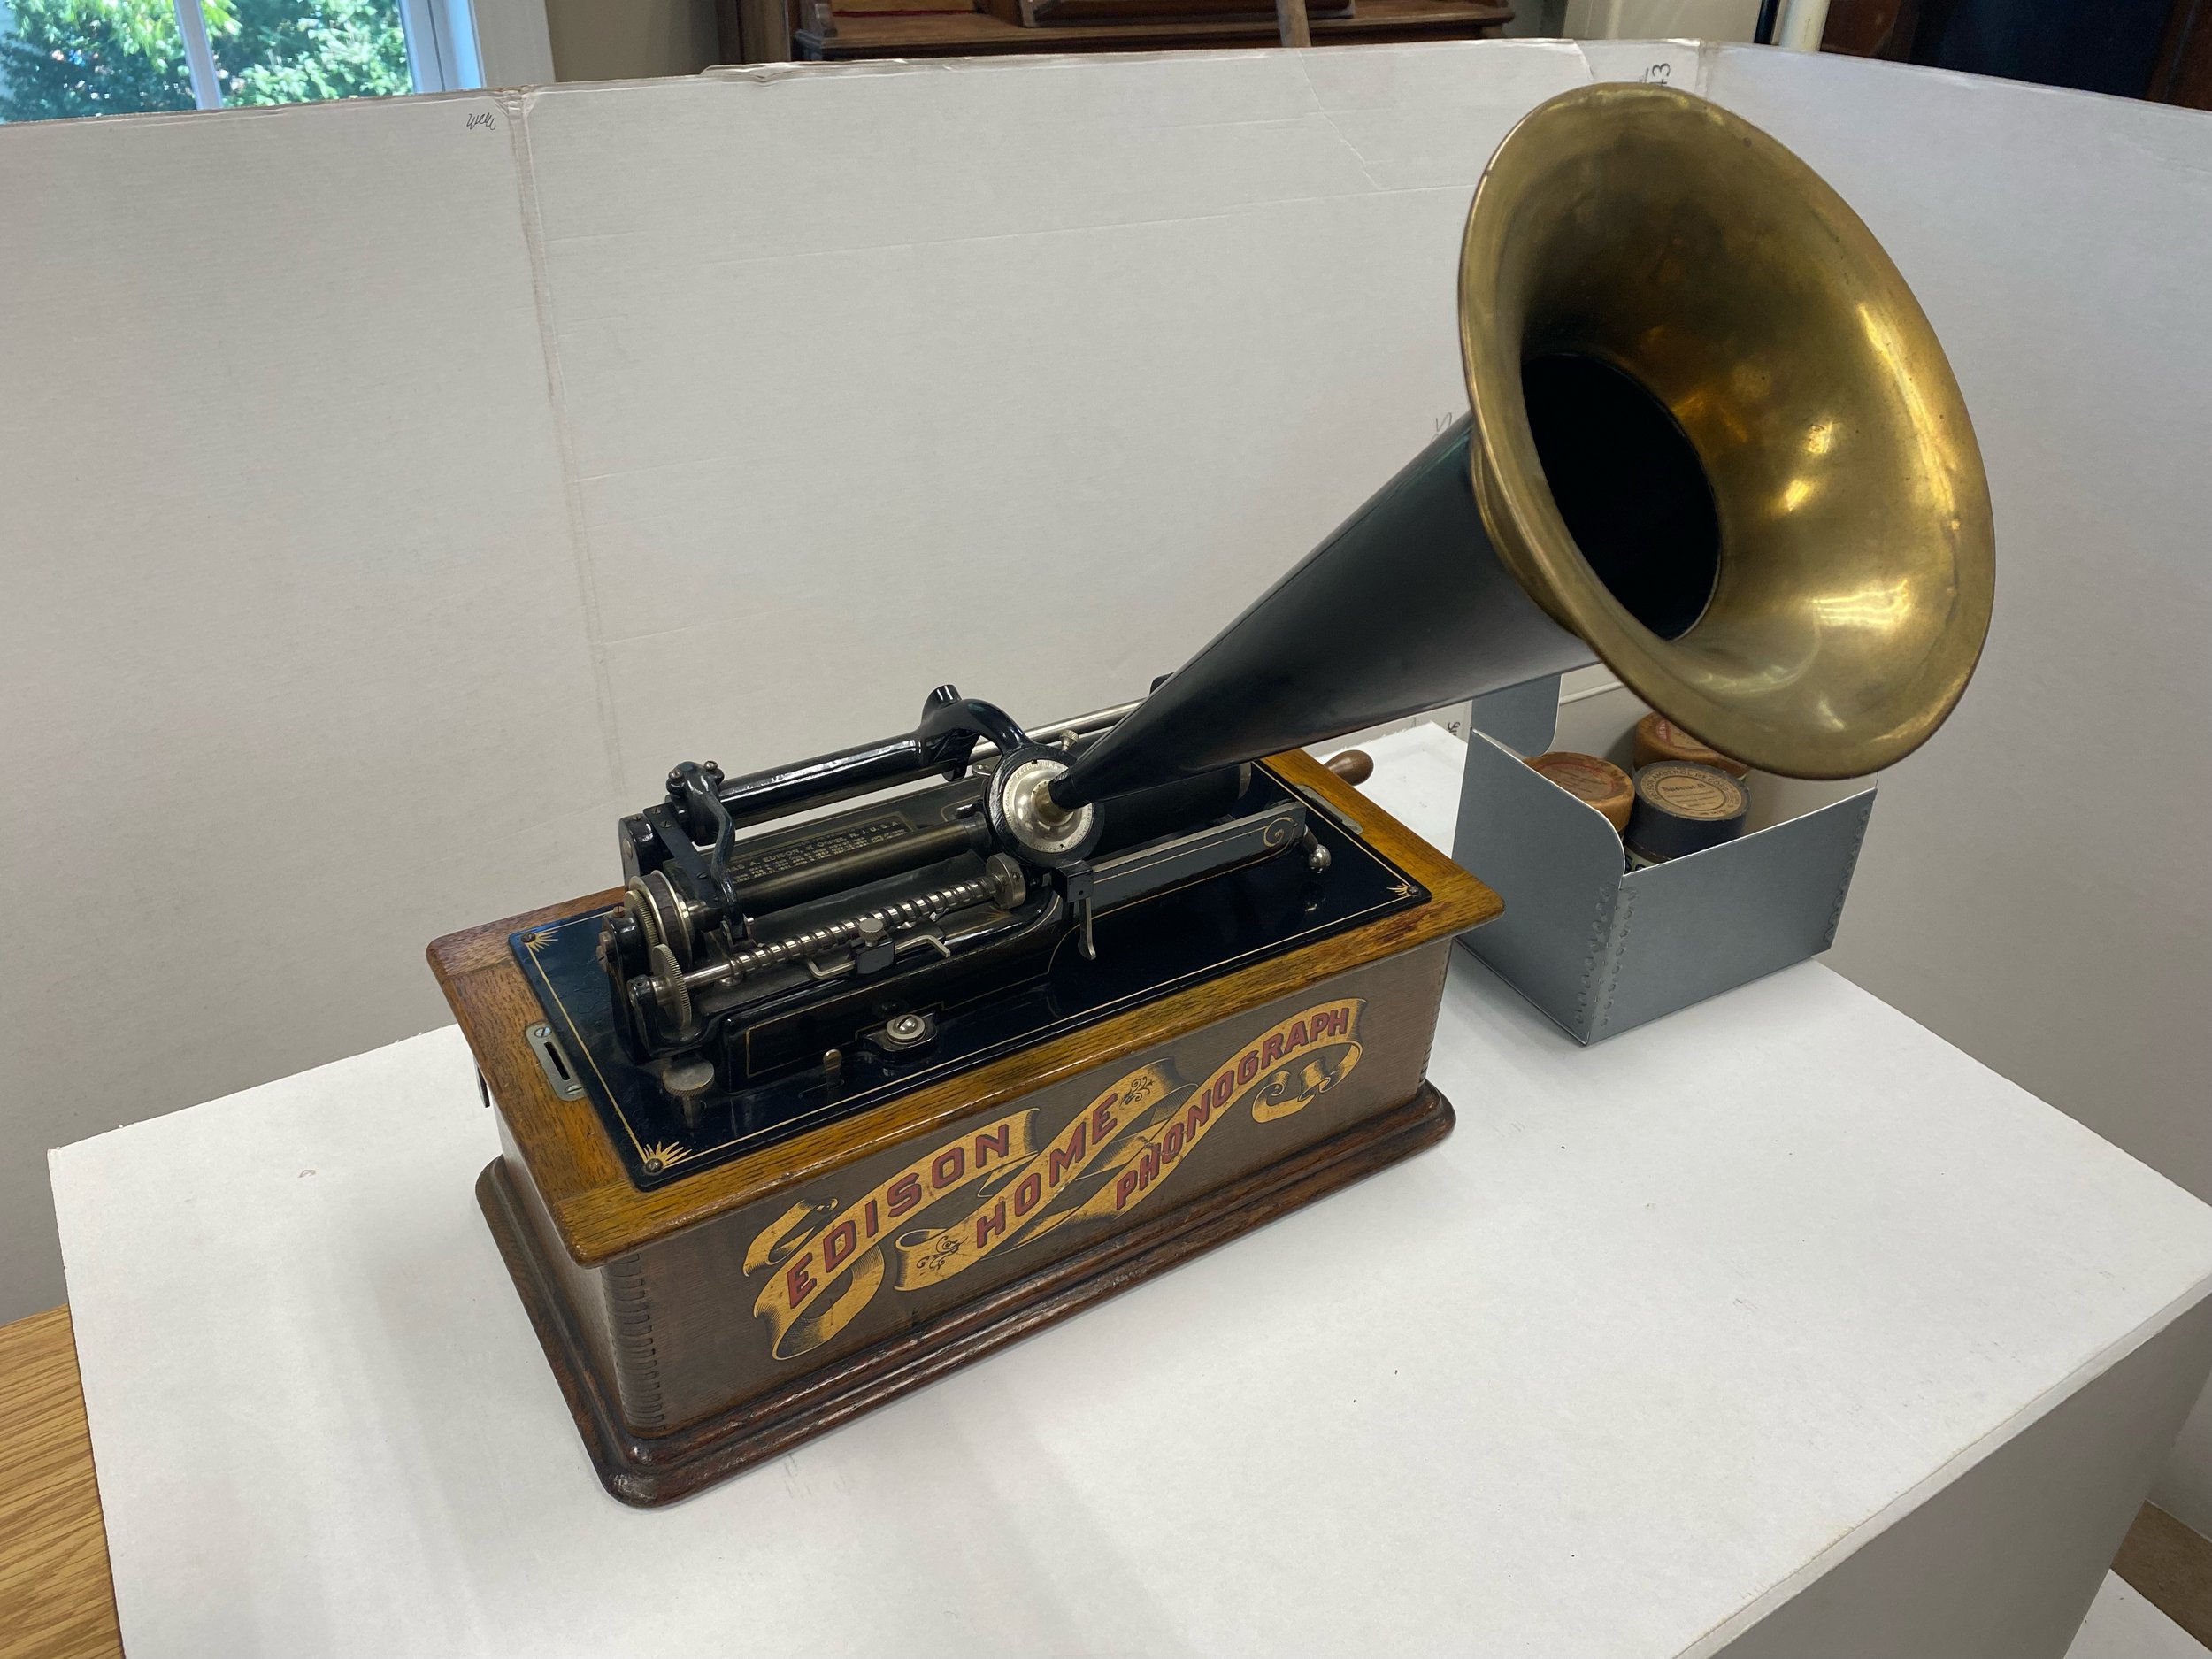 The Edison Phonograph — Sumter County Museum